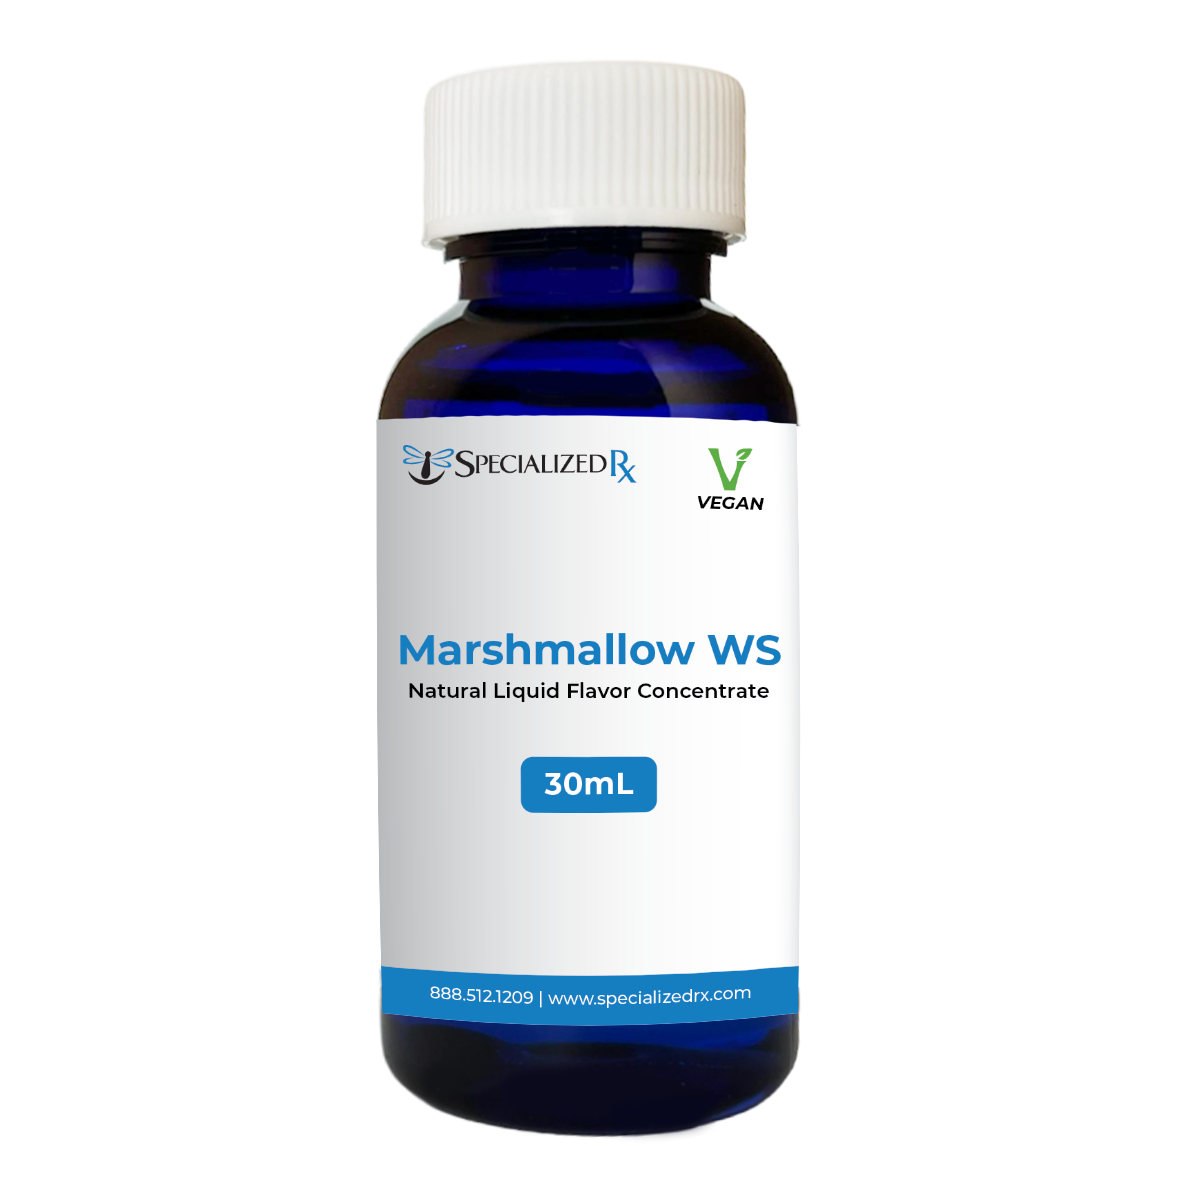 Marshmallow WS Natural Liquid Flavor Concentrate